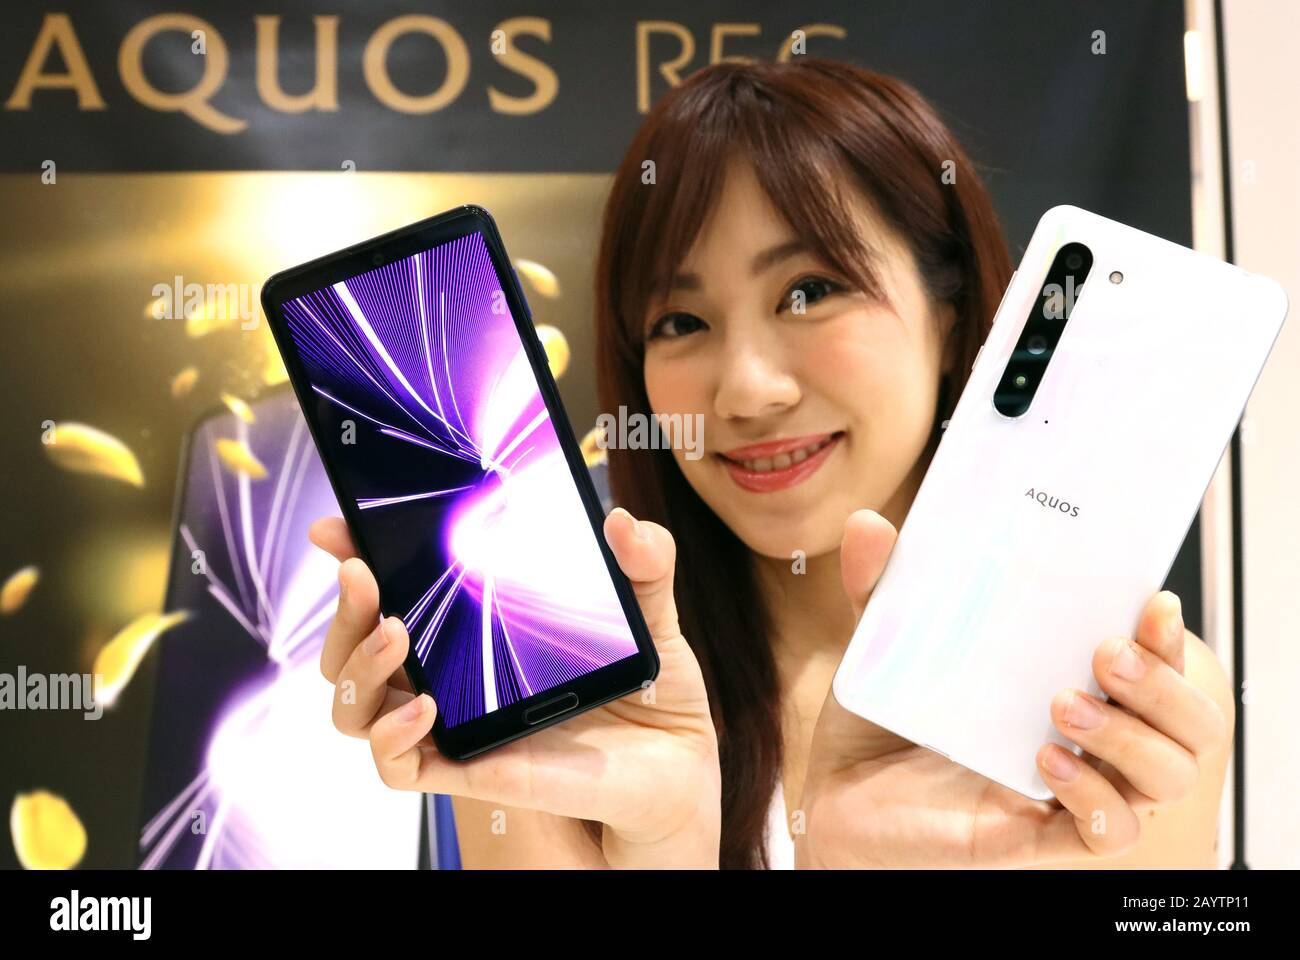 Tokyo, Japan. 17th Feb, 2020. Japan's electronics giant Sharp unveils the new 5G smartphone "AQUOS R5G" equipped with Qualcomm's Snapdragon 865 on its CPU, 6.5-inch sized IGZO LCD display and three cameras with a 3D sensor at the company's Tokyo office in Tokyo on Monday, February 17, 2020. Sharp will put Japan's first 5G smartphone on the market in this spring. Credit: Yoshio Tsunoda/AFLO/Alamy Live News Stock Photo